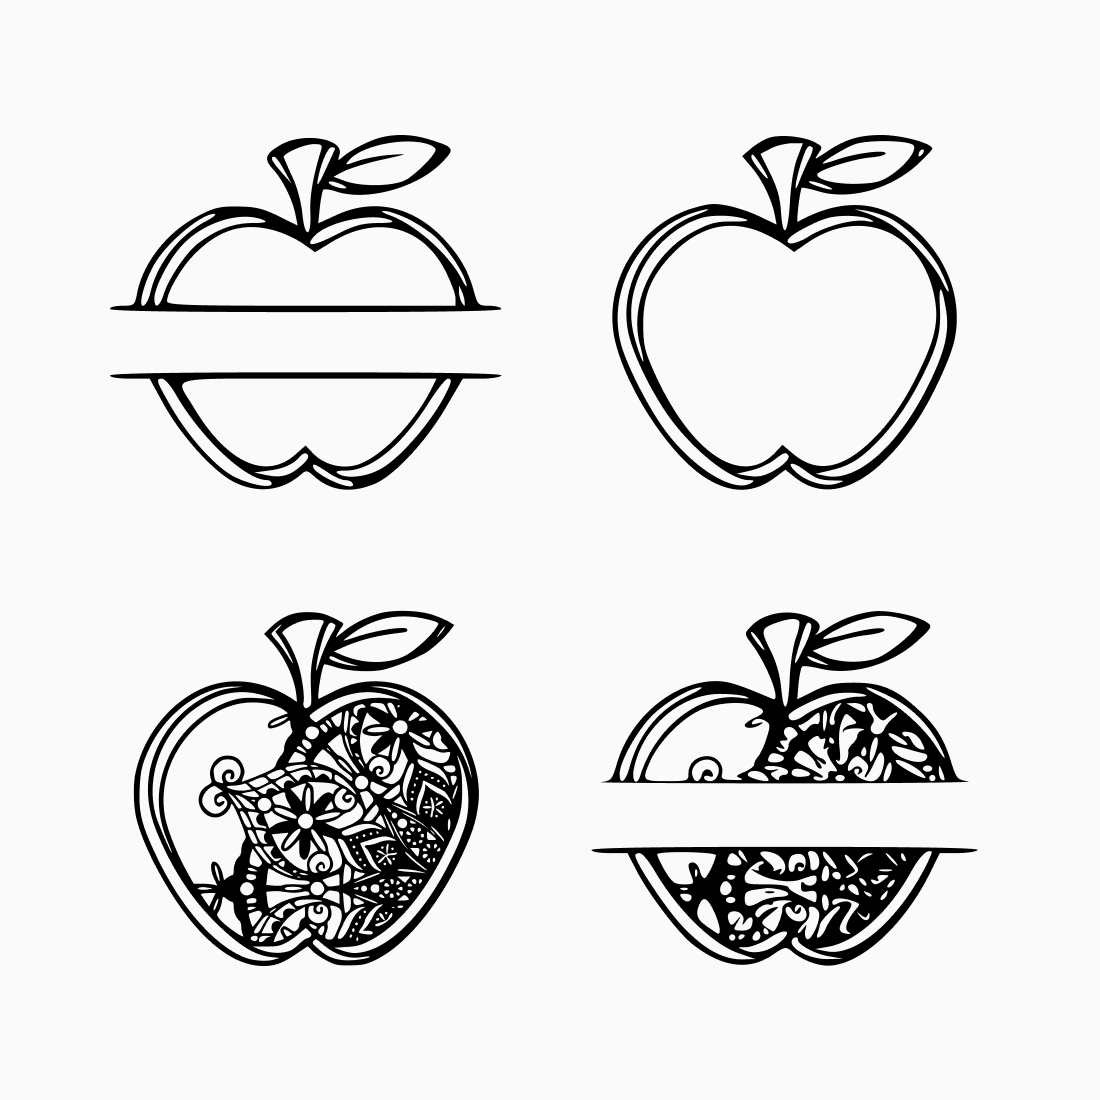 Black Apples with Design and without It.